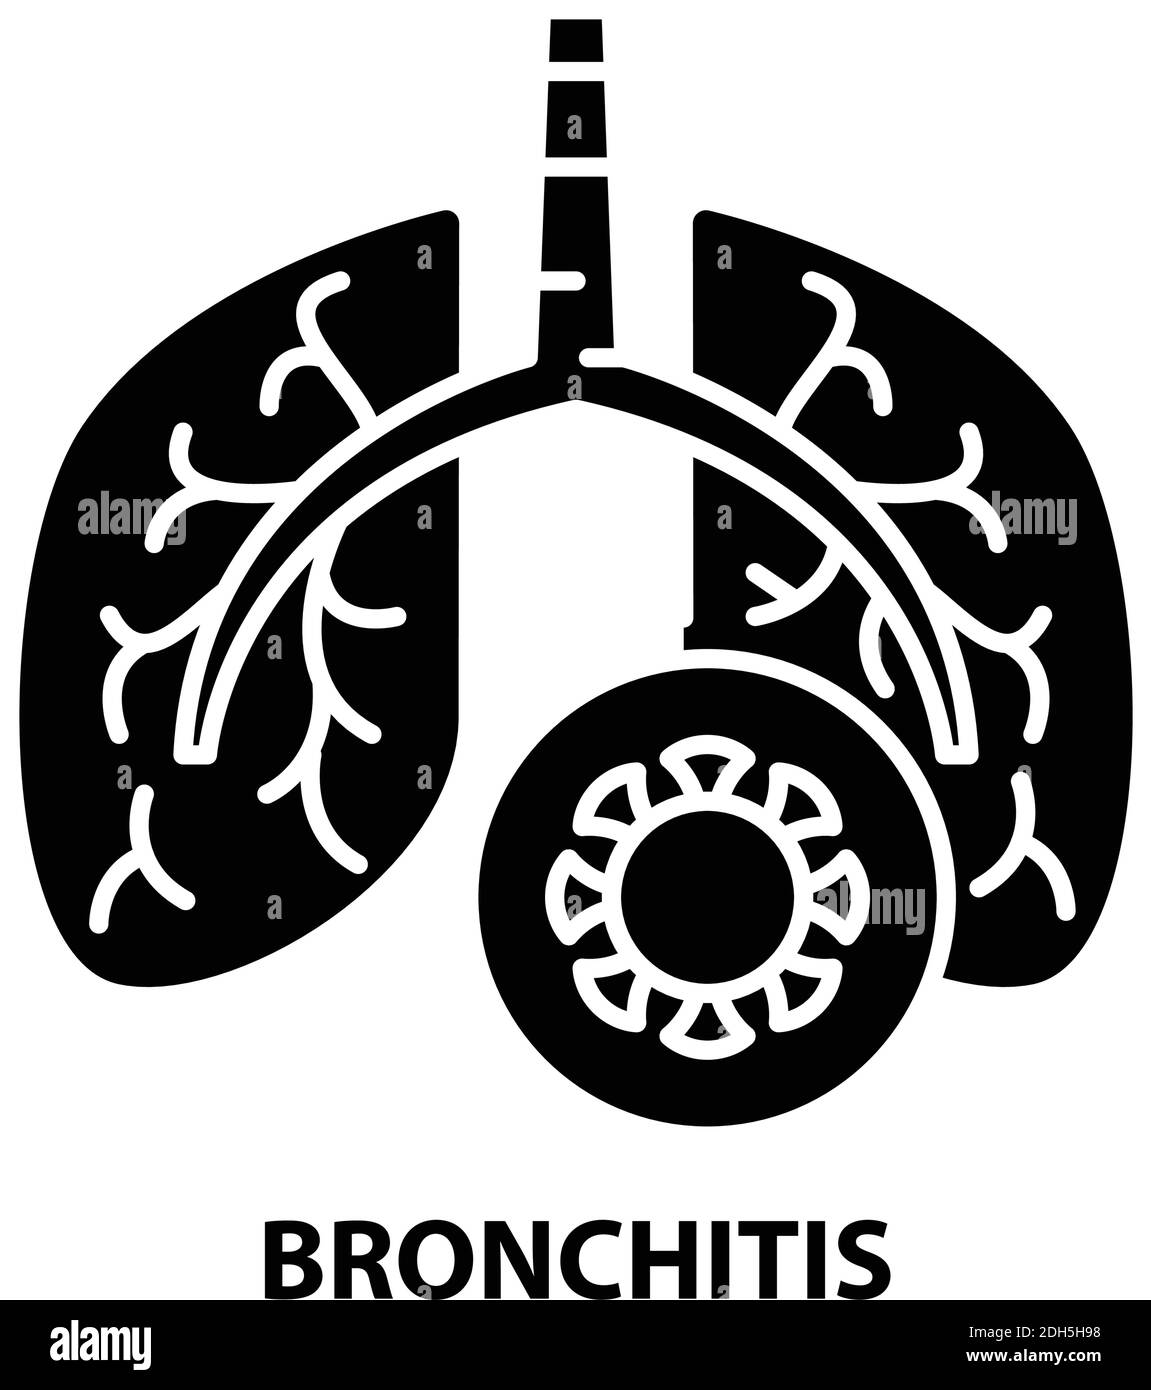 bronchitis icon, black vector sign with editable strokes, concept illustration Stock Vector